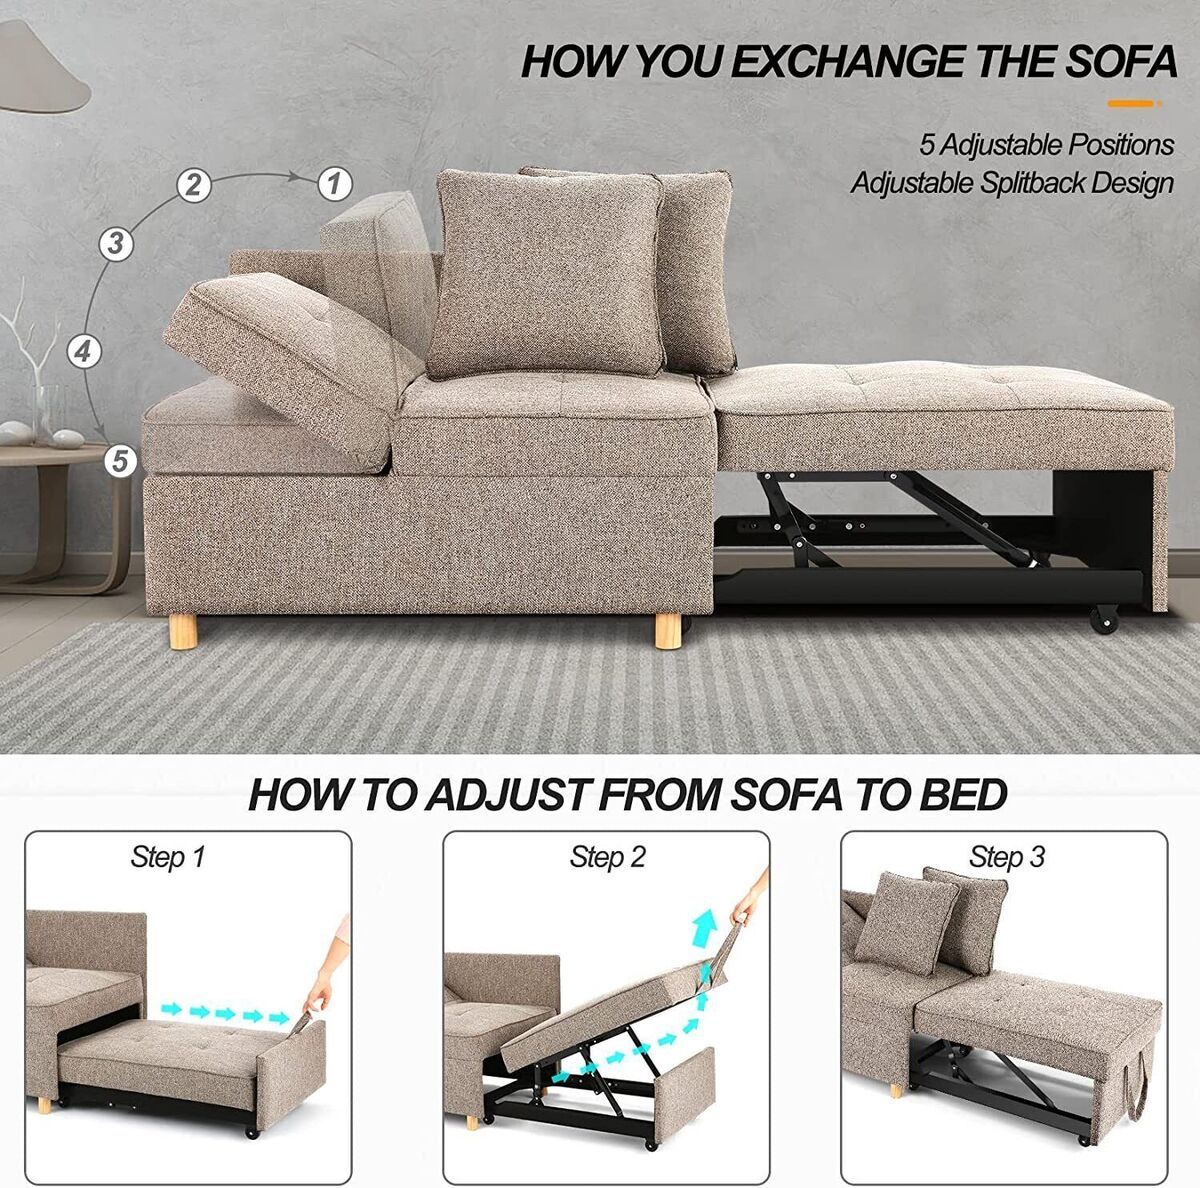 Convertible Sofa Bed 4 In 1 Sofa Beds Chair 3 Seat Futon Sofa , Reclining  Sofa:) | Ebay Pertaining To 8 Seat Convertible Sofas (View 15 of 15)